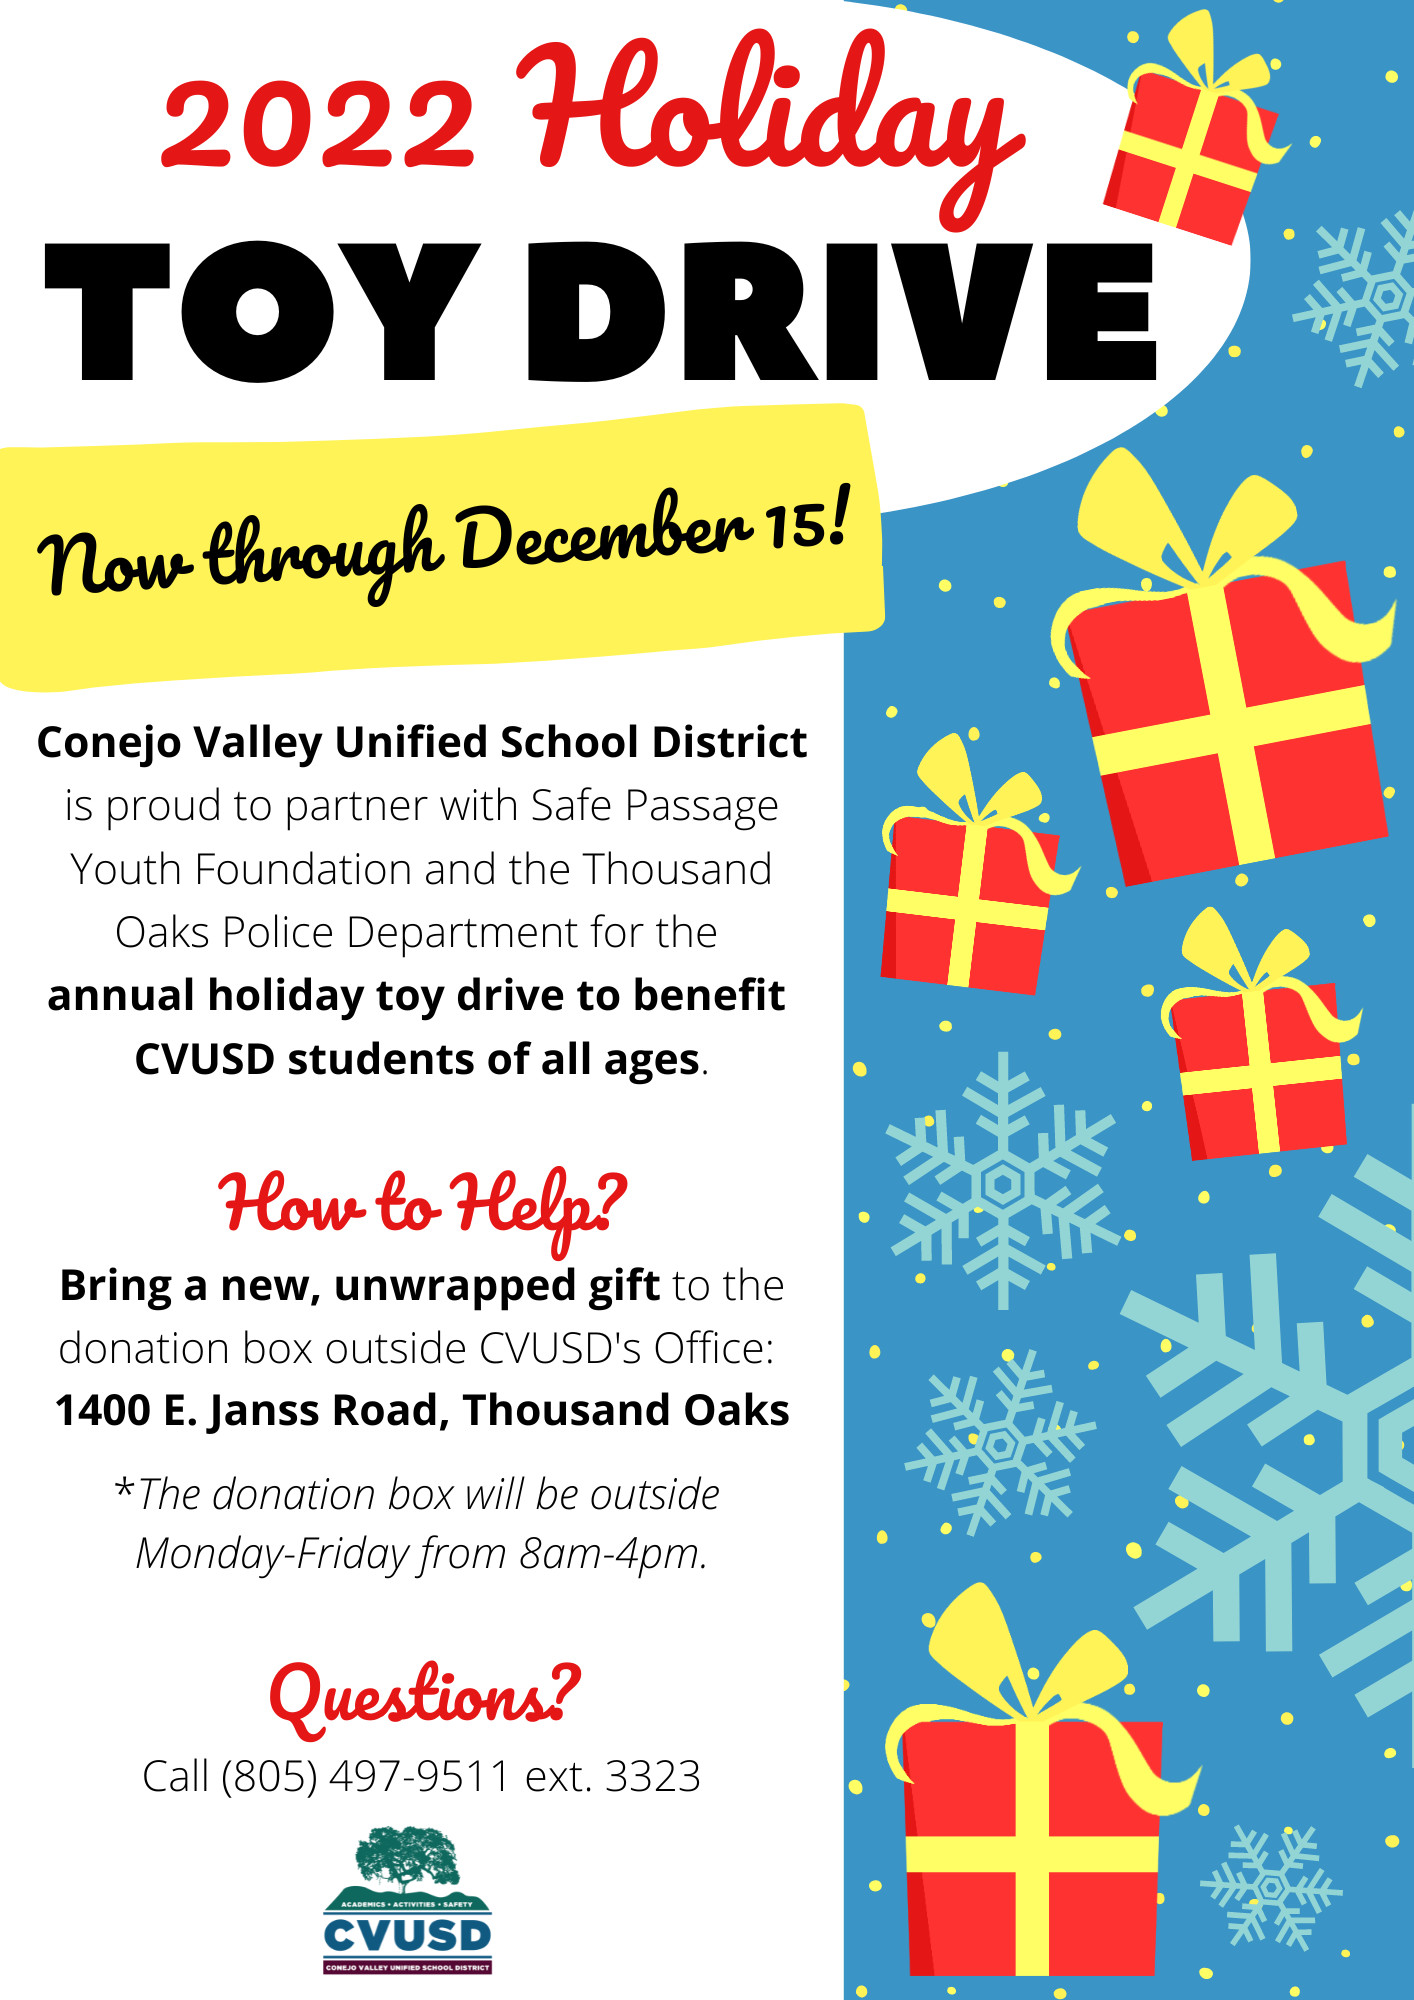 2022 Holiday Toy Drive